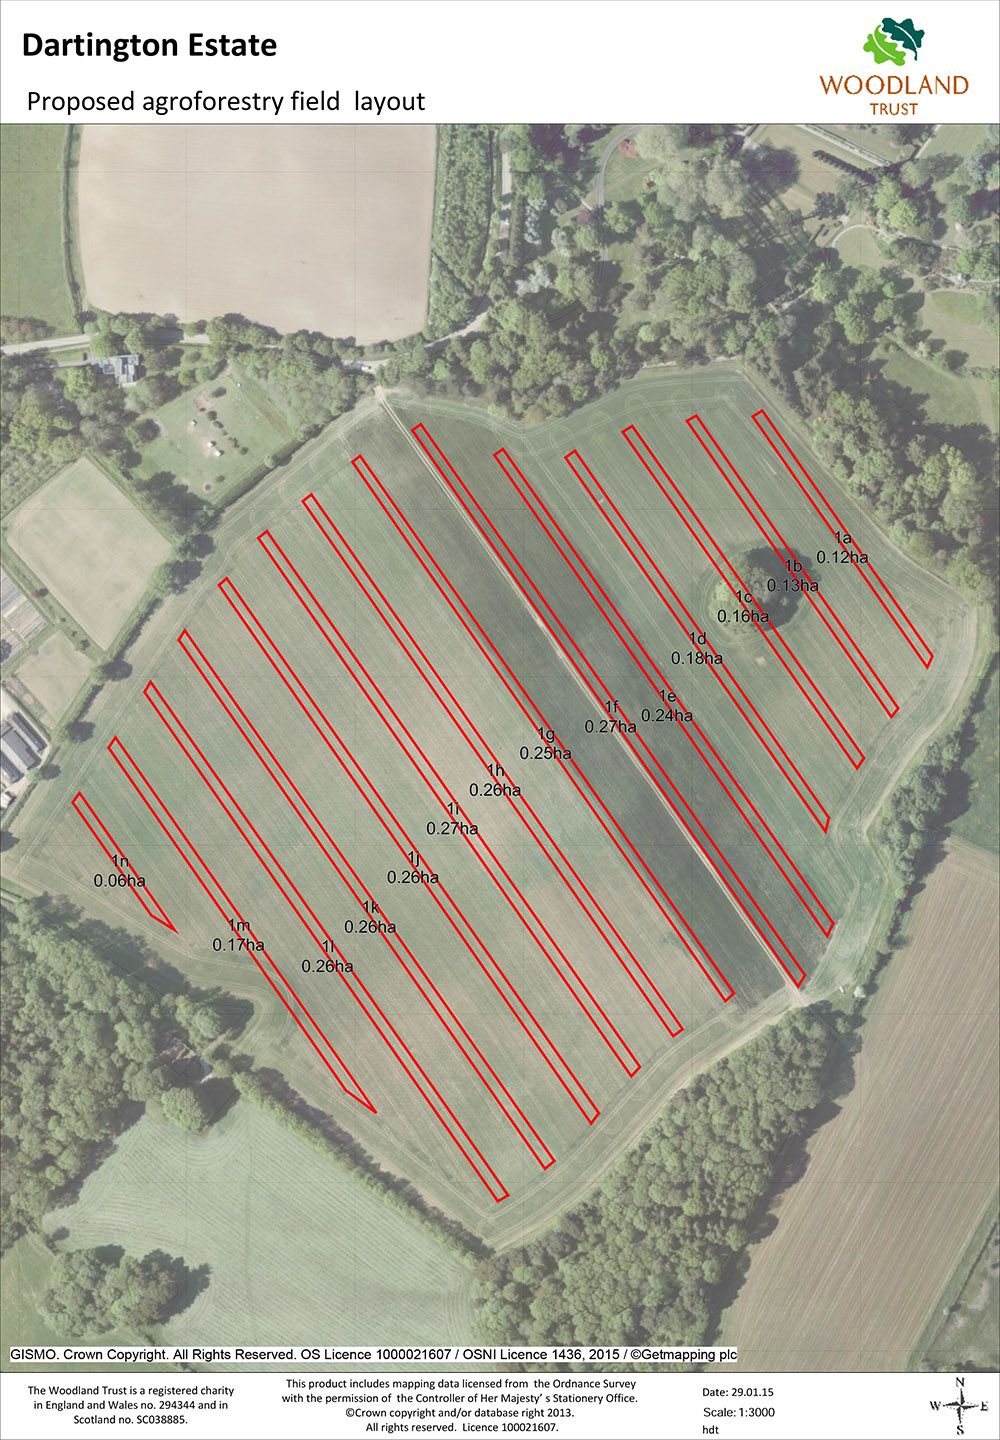 Agroforestry field proposed layout